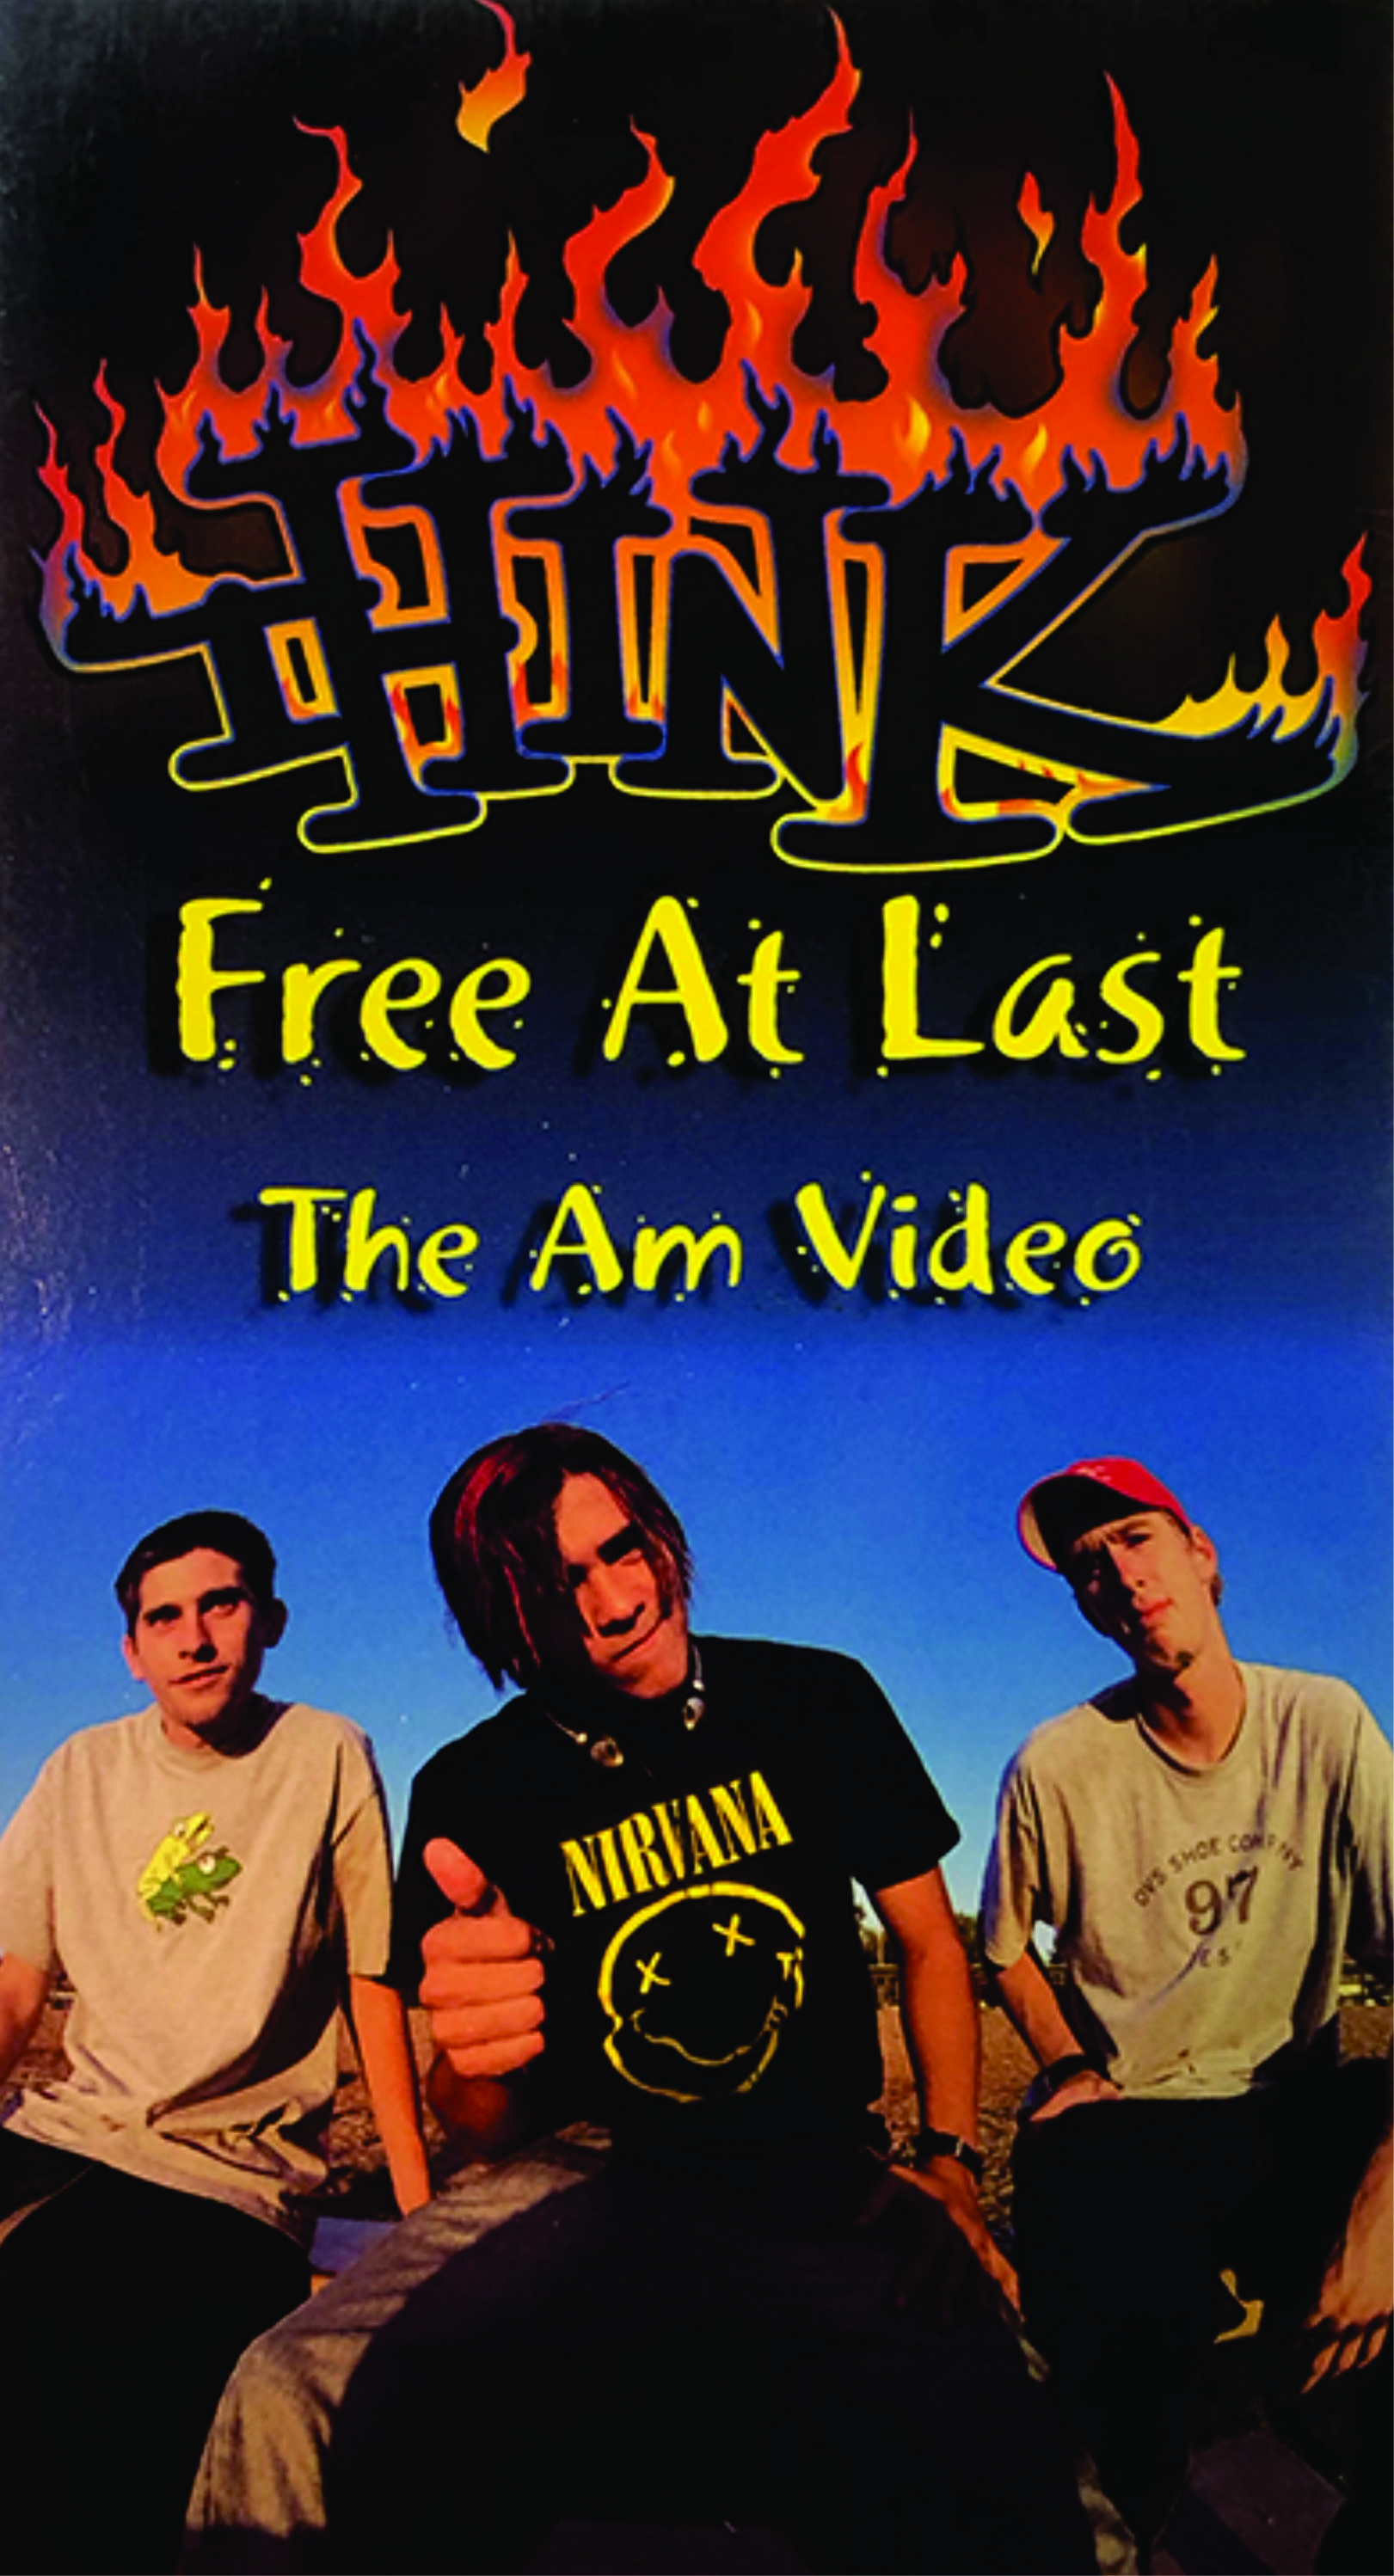 Think - Free At Last Vol. 2 - The Am Video cover